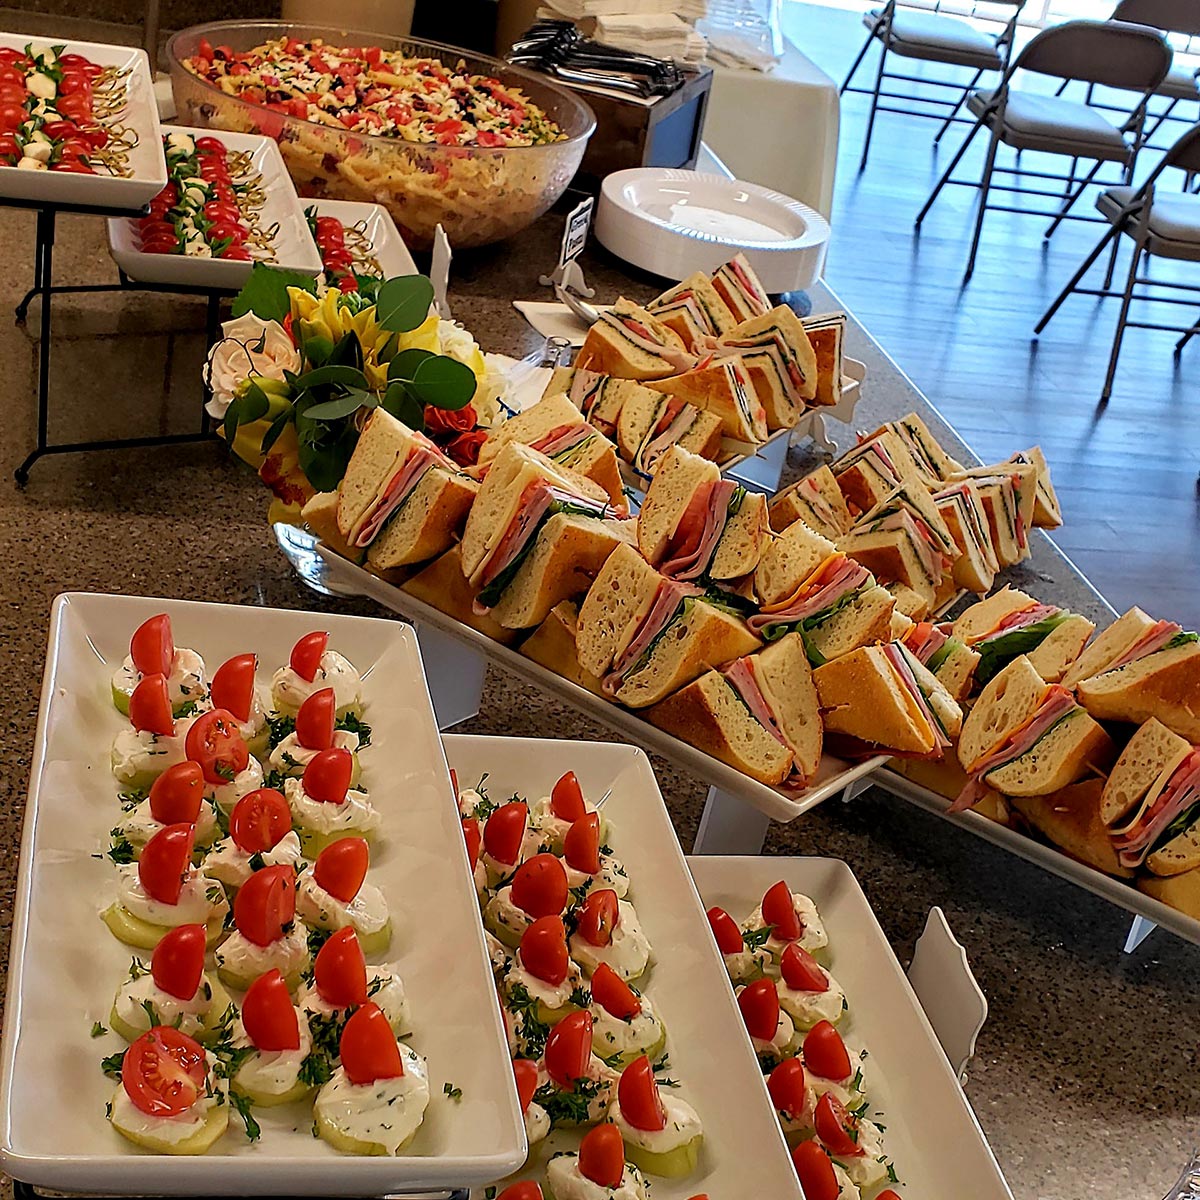 Corporate Office catering in Orange County, CA